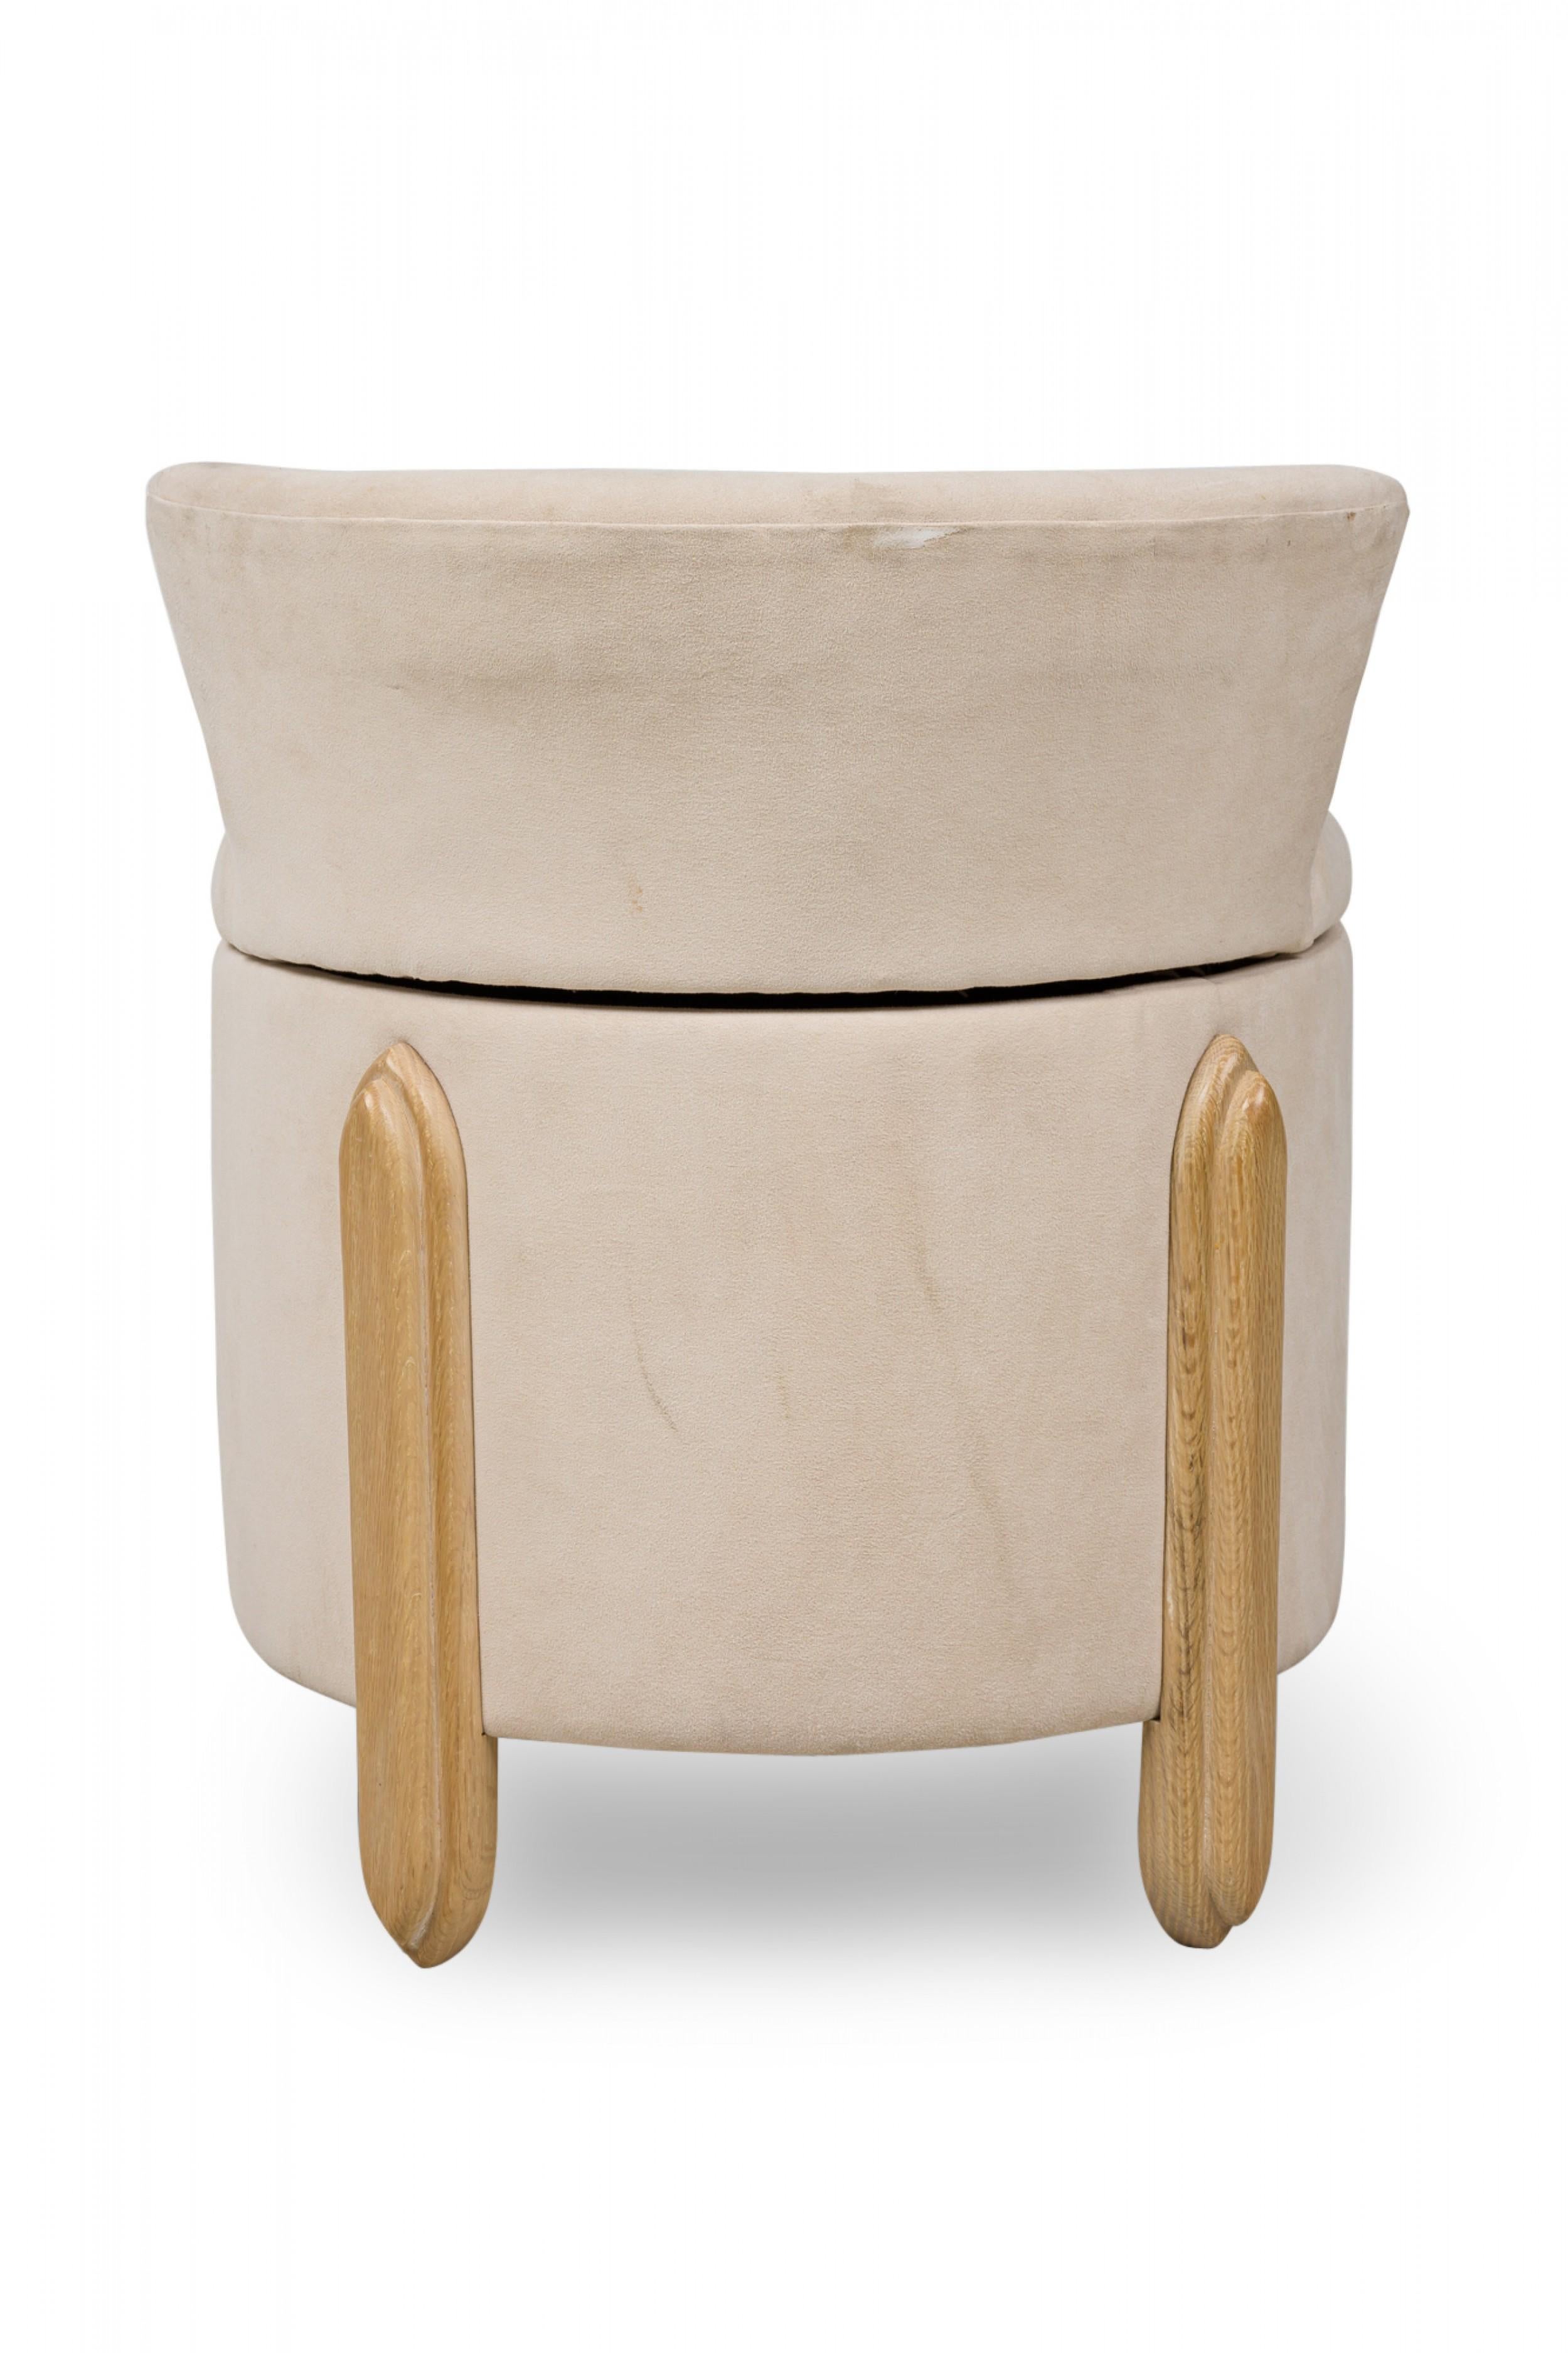 small ottoman with backrest